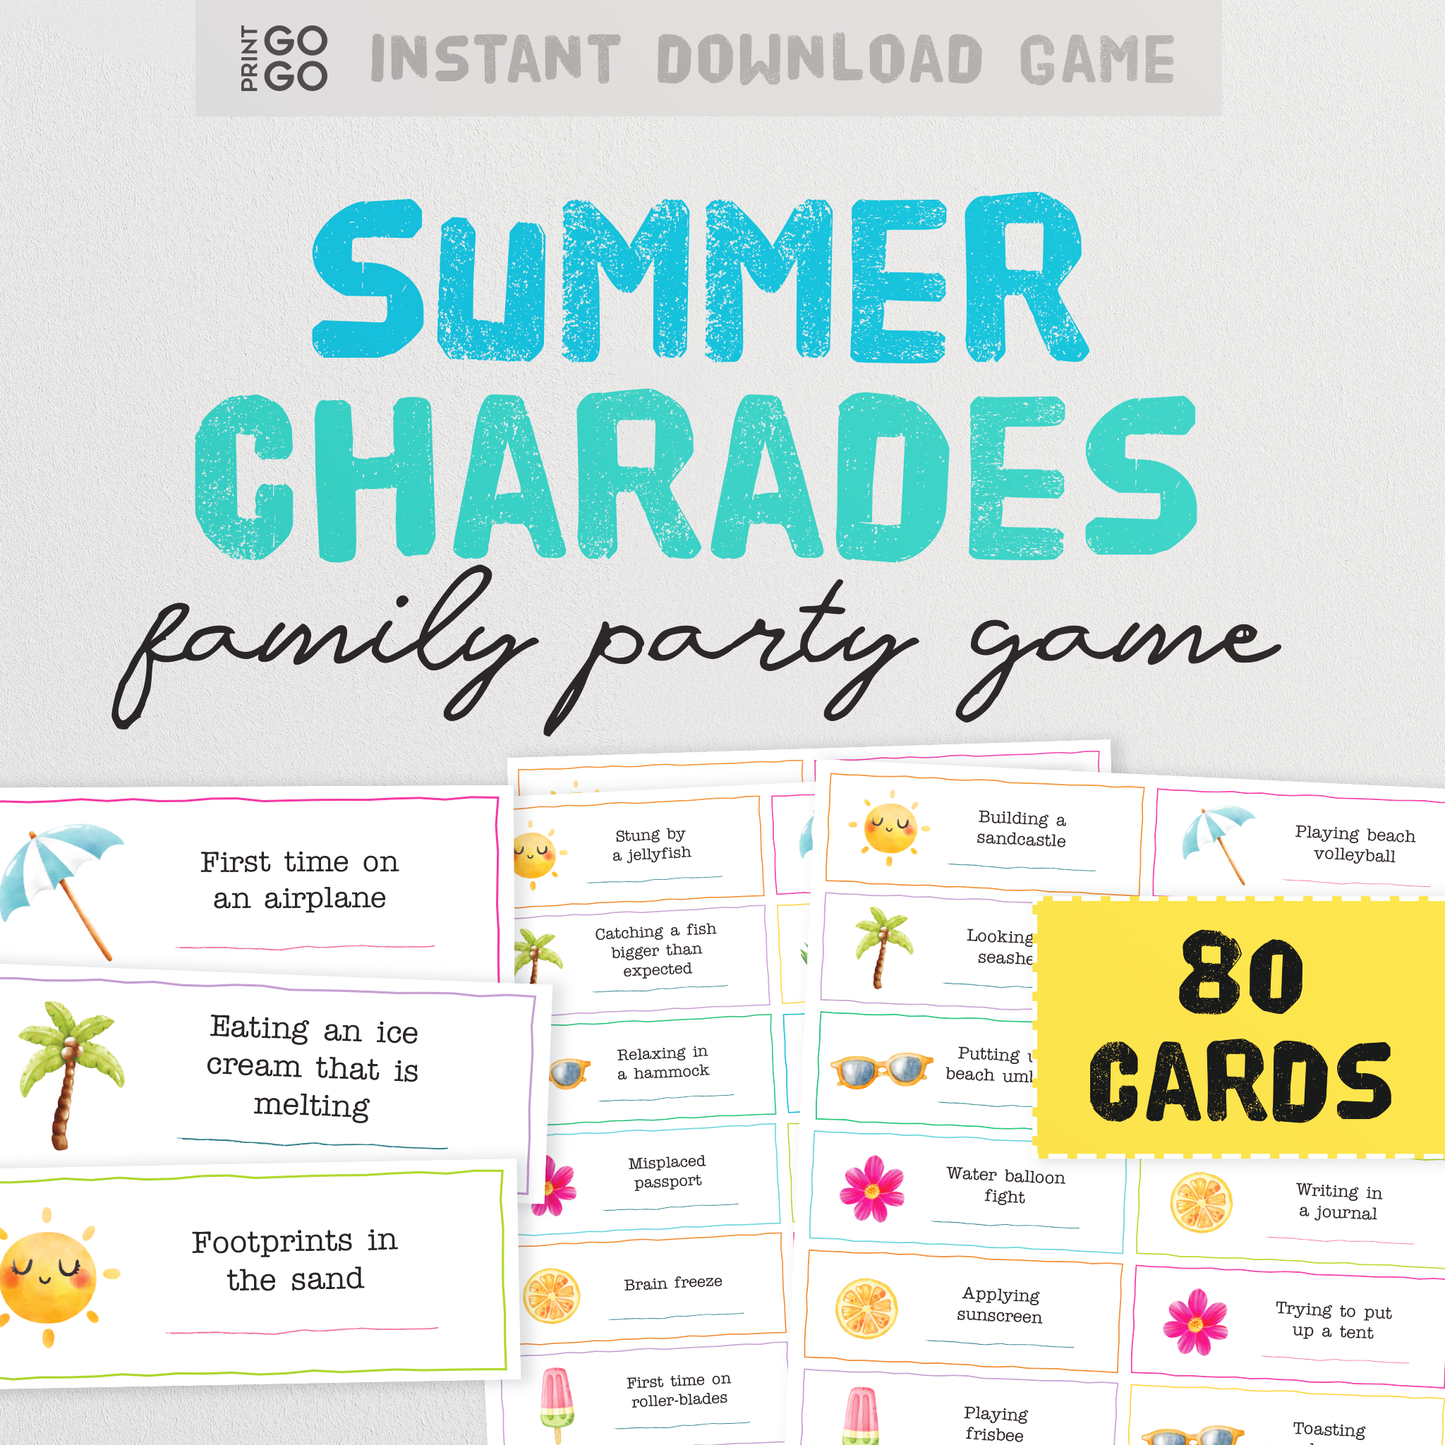 Summer Charades - The Fun Family Party Guessing Game